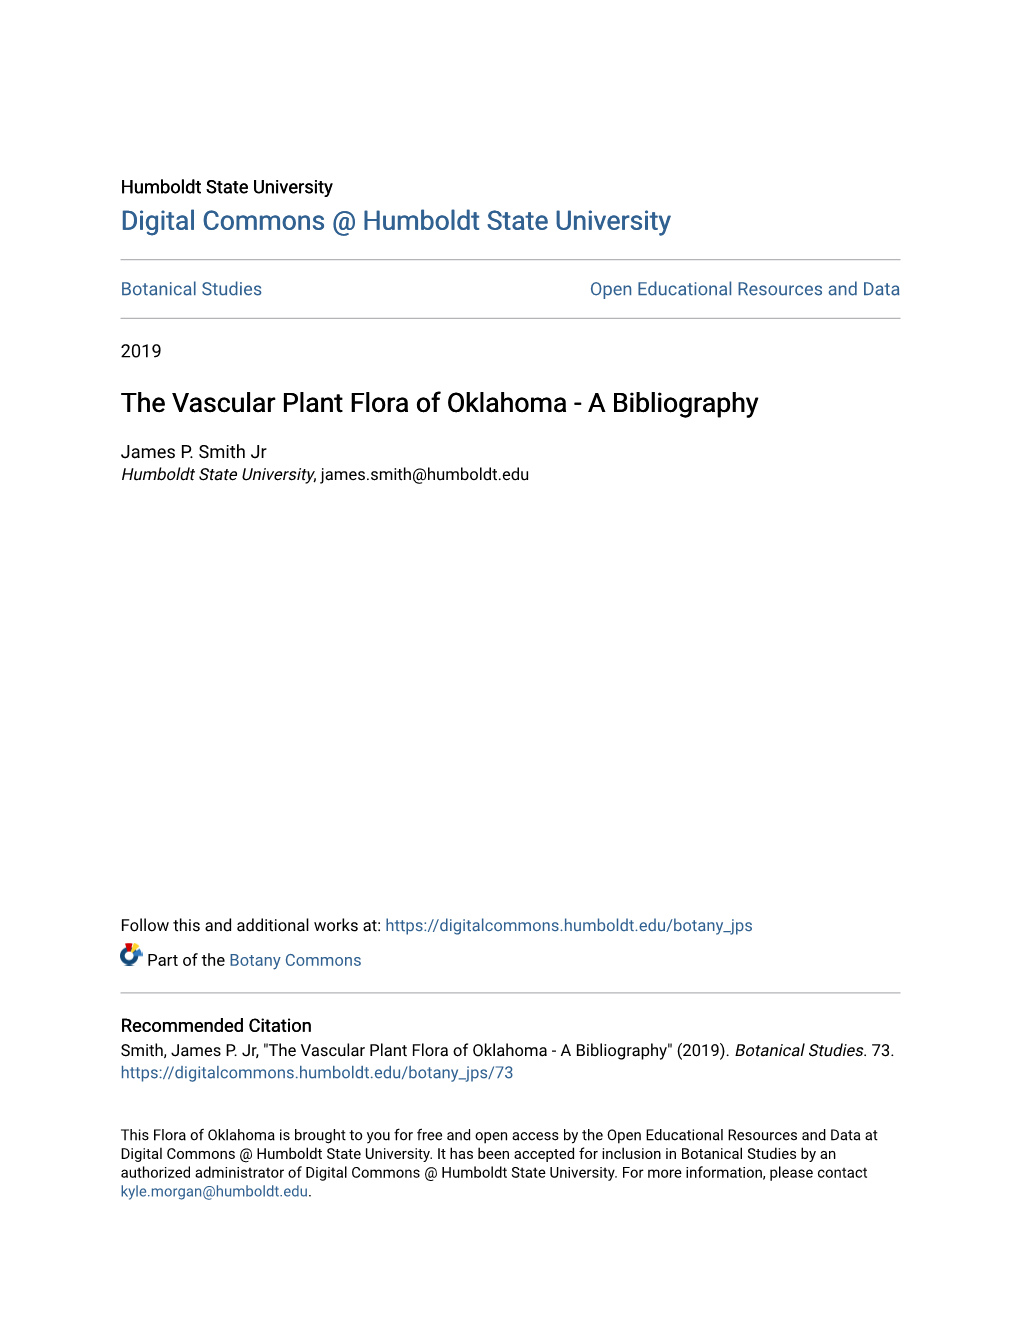 The Vascular Plant Flora of Oklahoma - a Bibliography